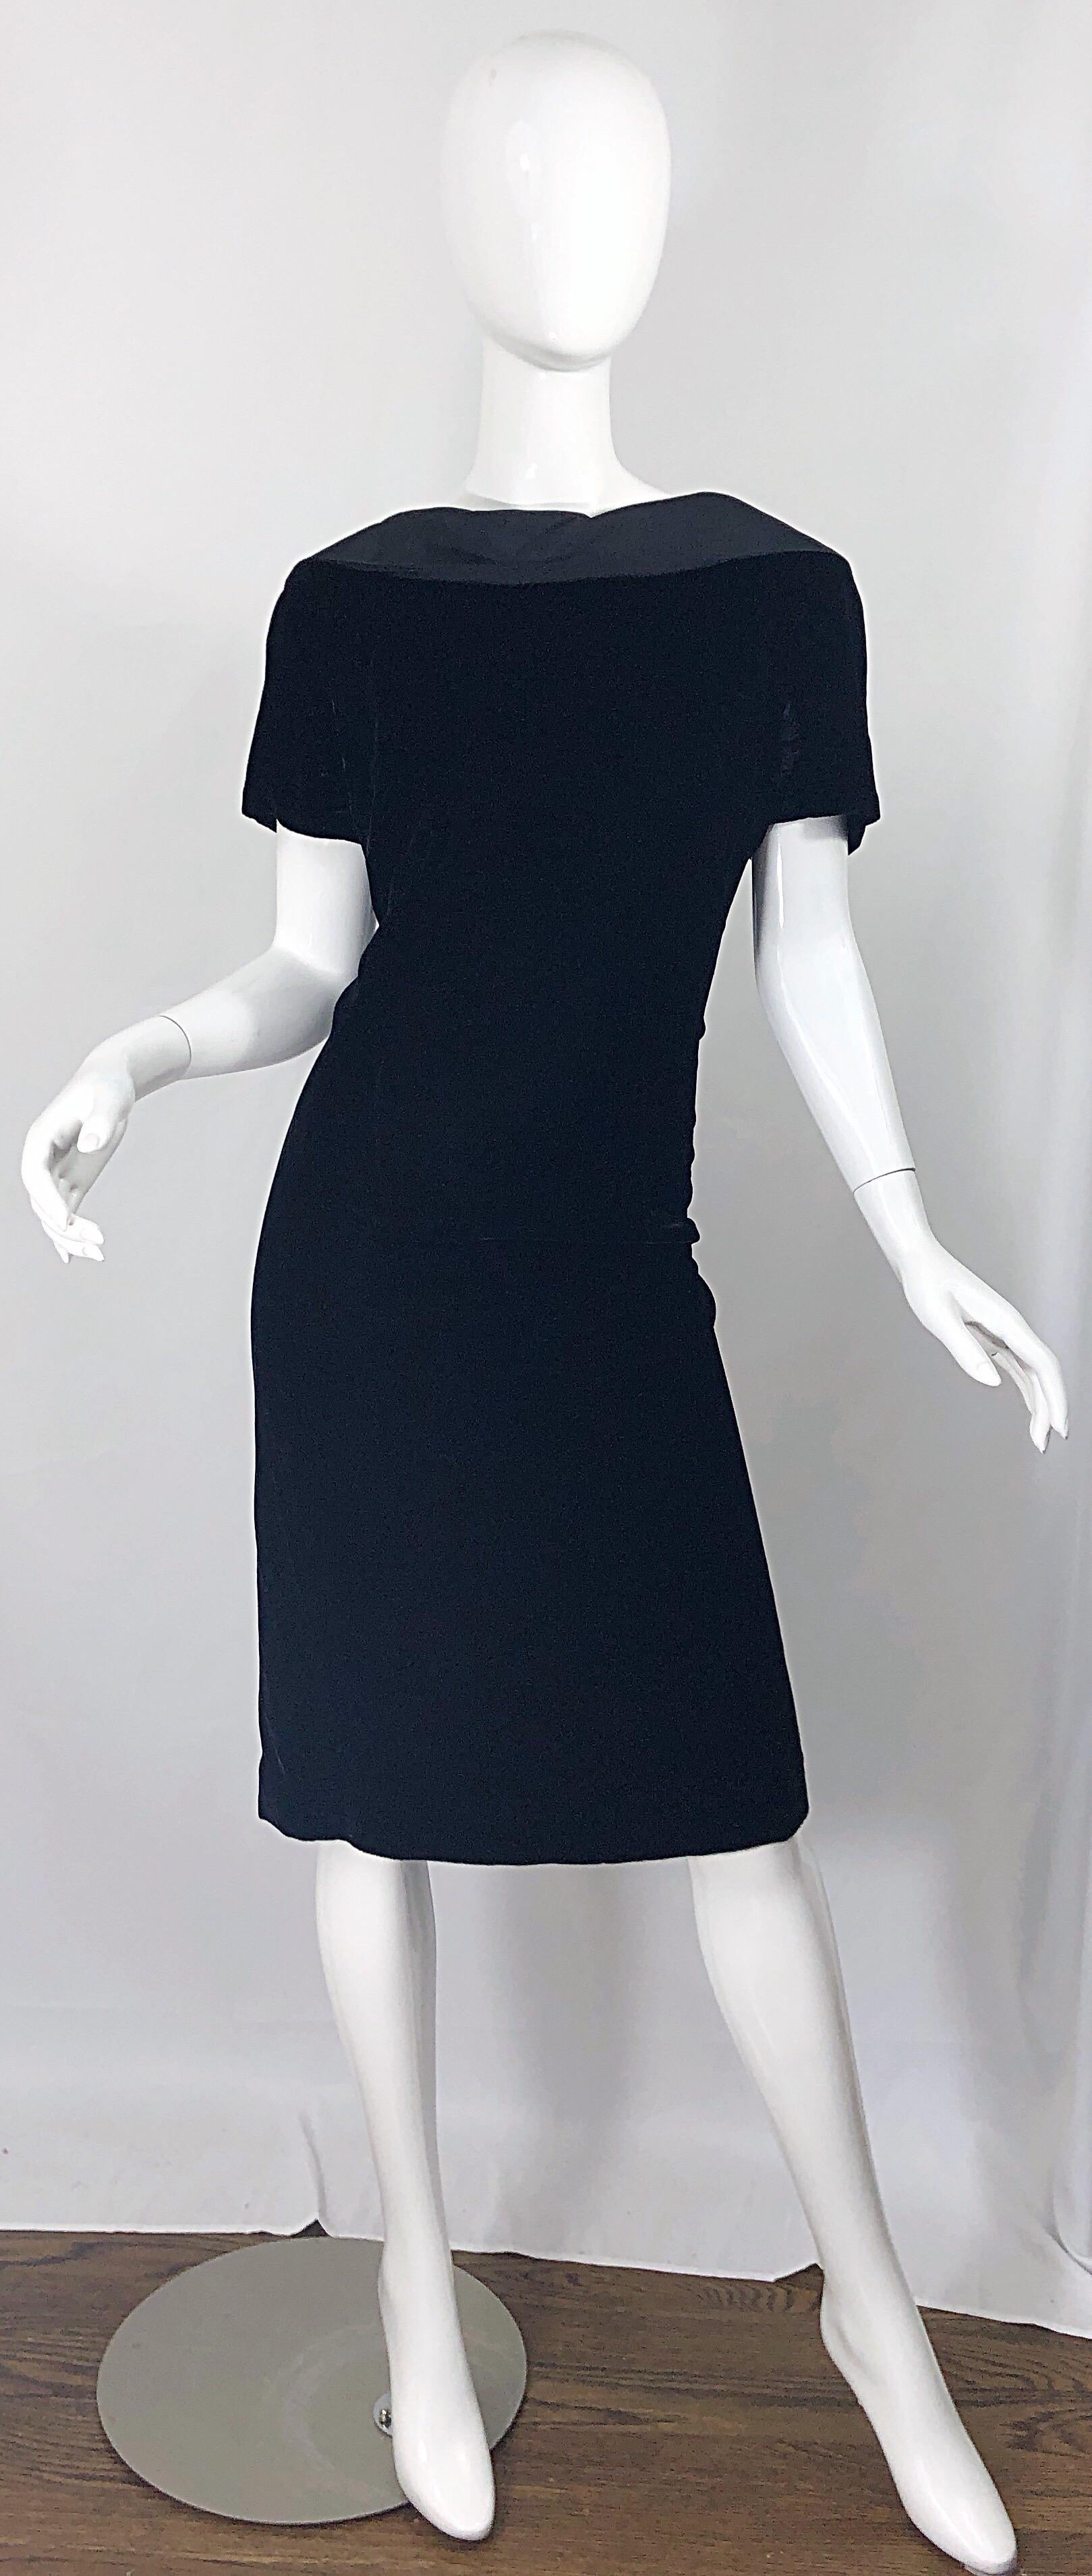 Bombshell early 50s EDITH FLAGG black silk velvet larger size wiggle dress! Edith Flagg was a Romanian-born fashion designer who started her own label in 1950. She went on to become one of the most famed designers of the mid century - 1970s. 
This